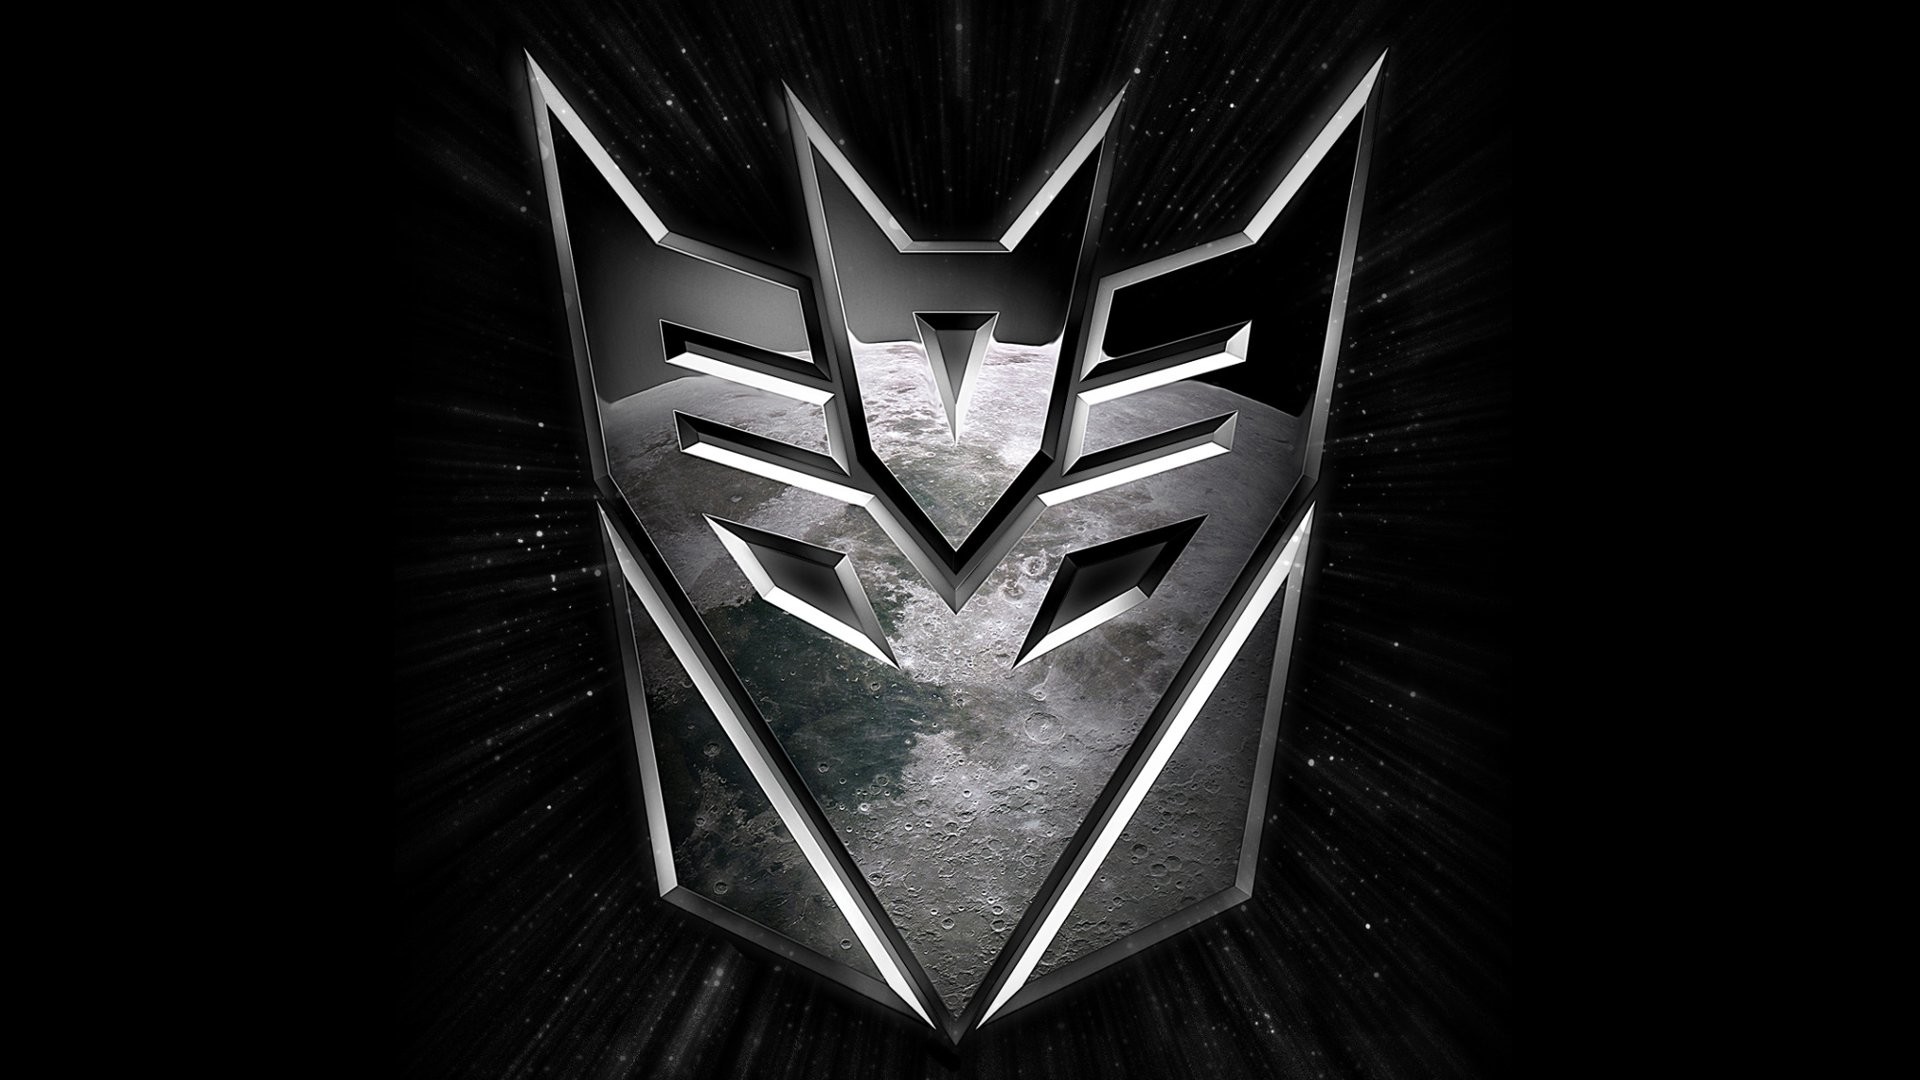 1920x1080 Transformers 3 Dark Of The Moon Poster